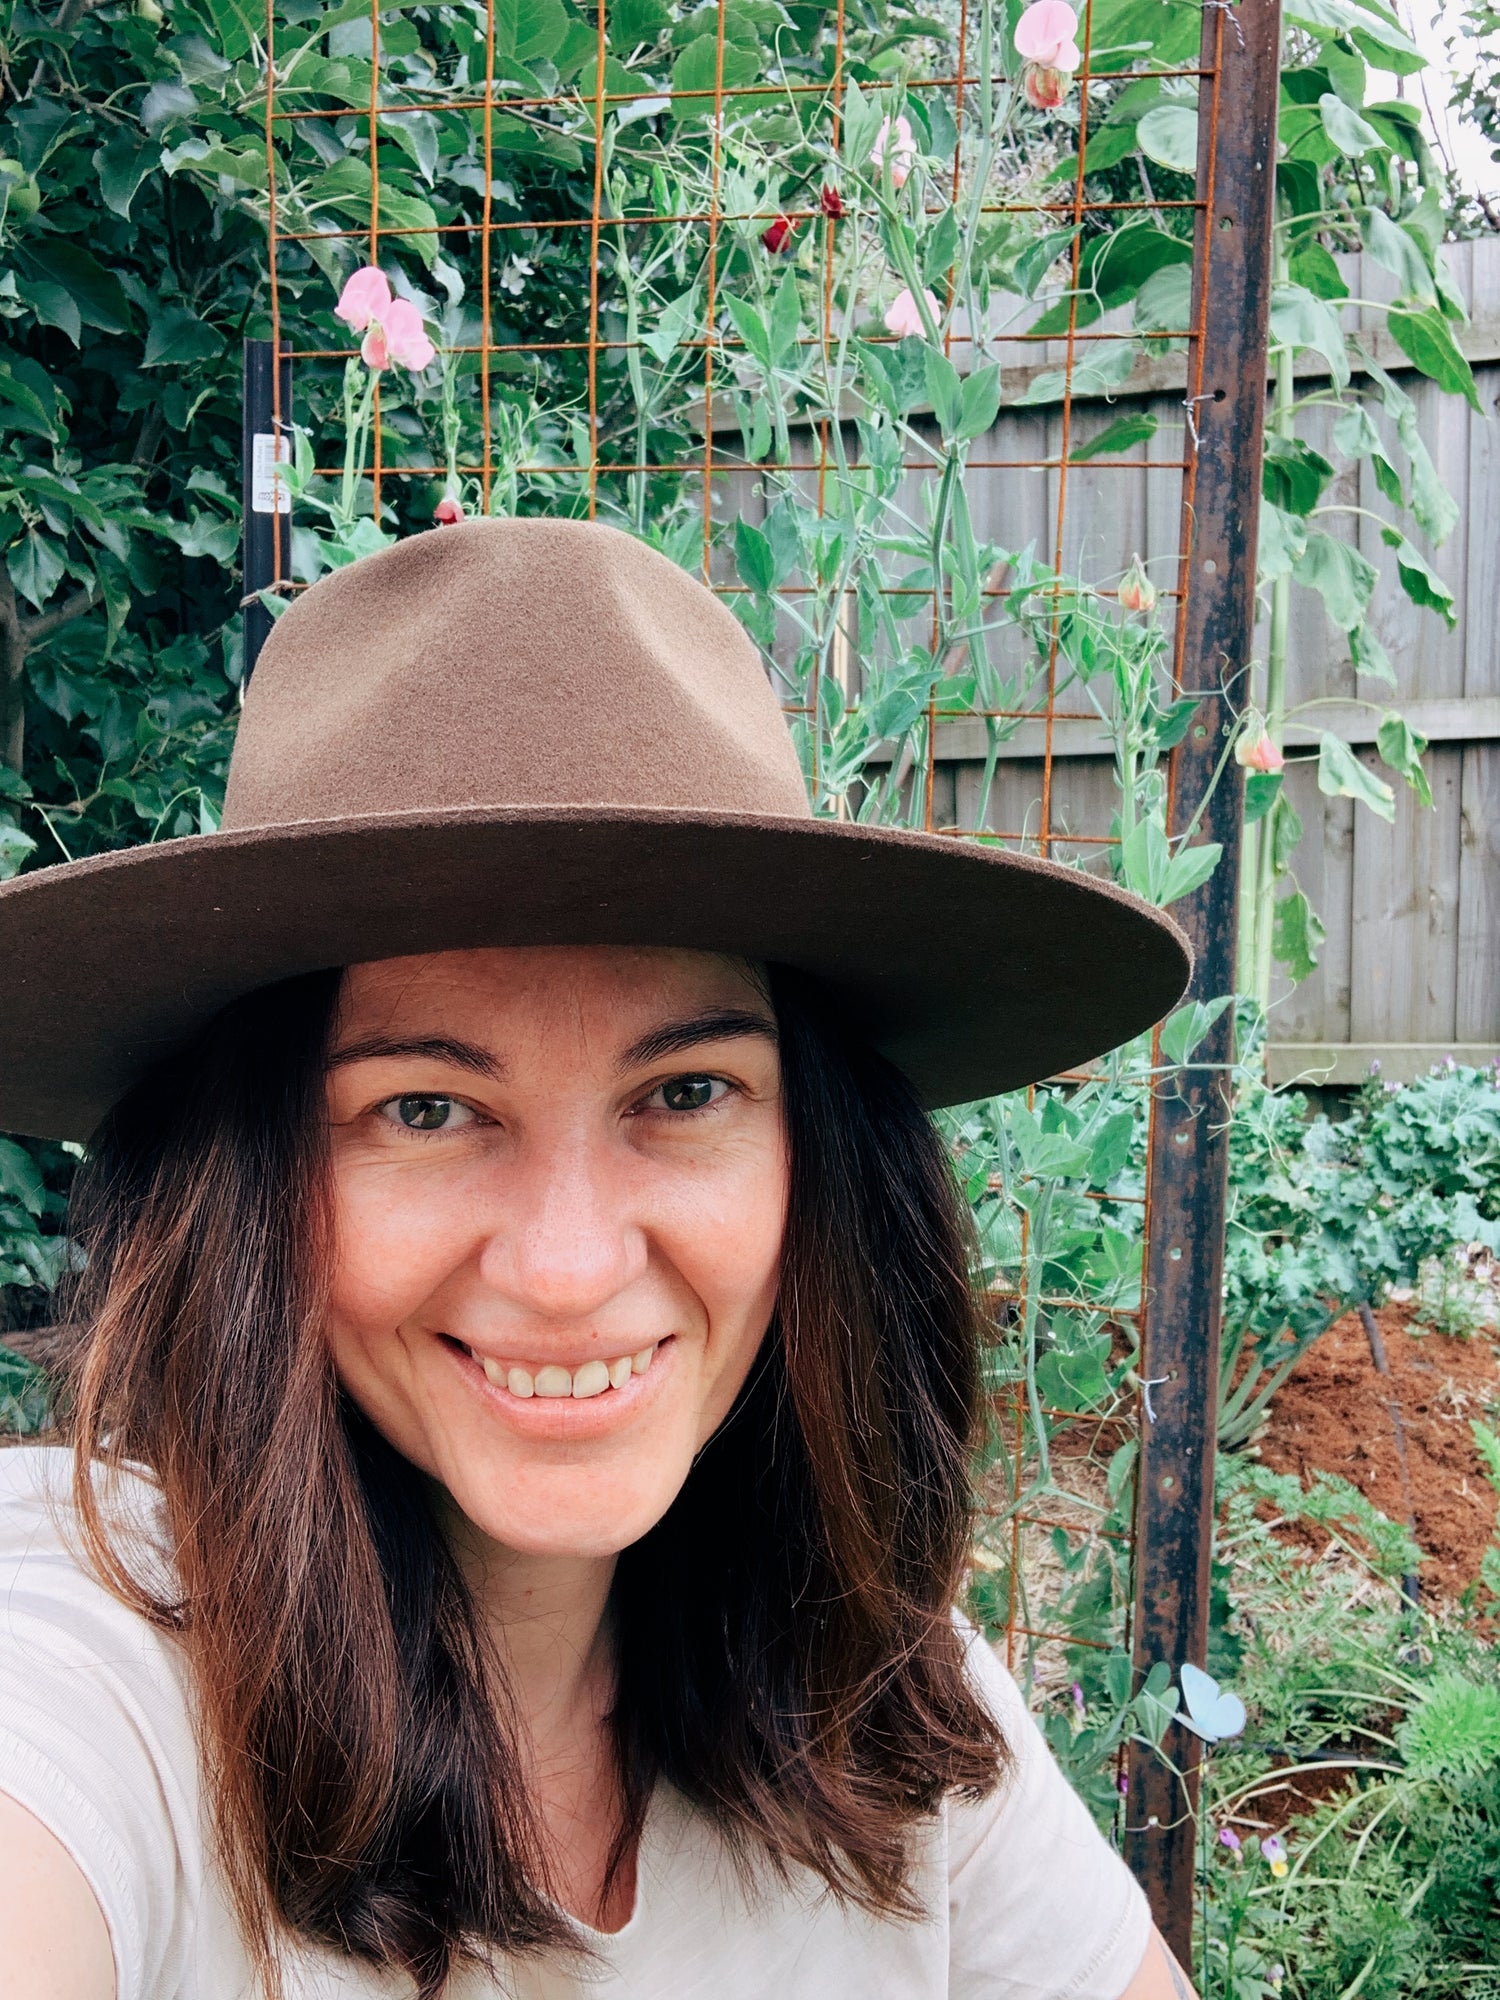 A photo of Vic wearing a brown felt hat and smiling into the camera in her former tiny urban vegetable garden